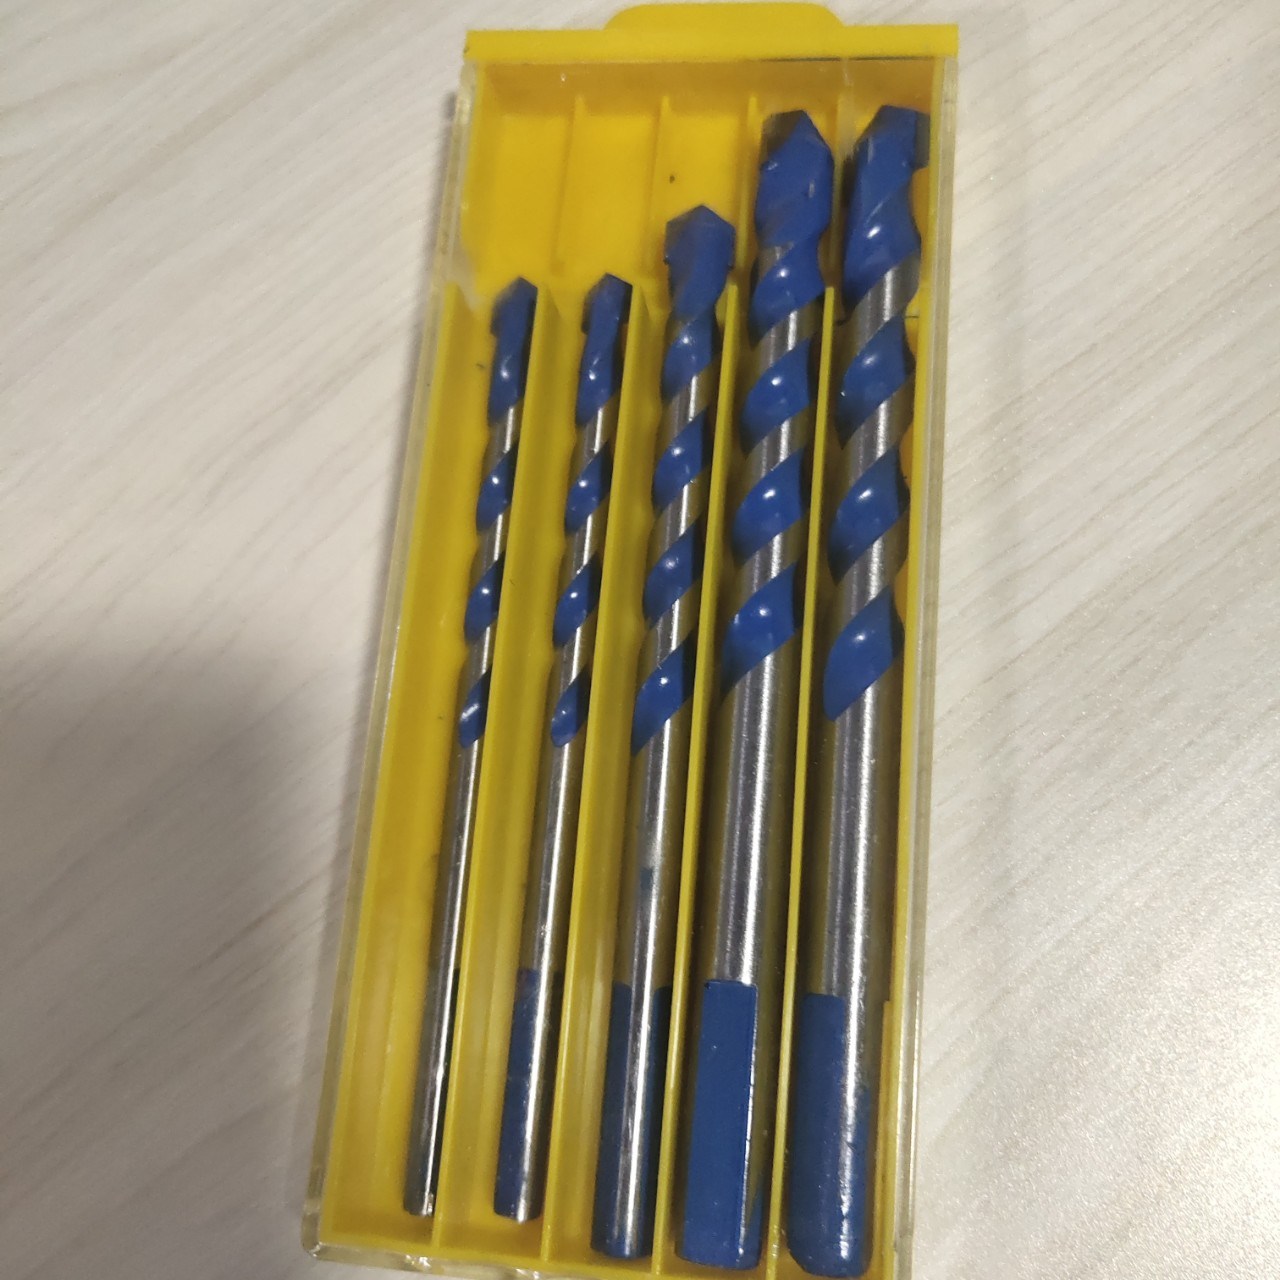 5PCS Carbide Tip Multifunction Drill Bits Set with Blue Flute Coating for Drilling Stone, Steel, Glass, Concrete, Wood, Plastic, Brick and Tiles (SED-MTD-S5)